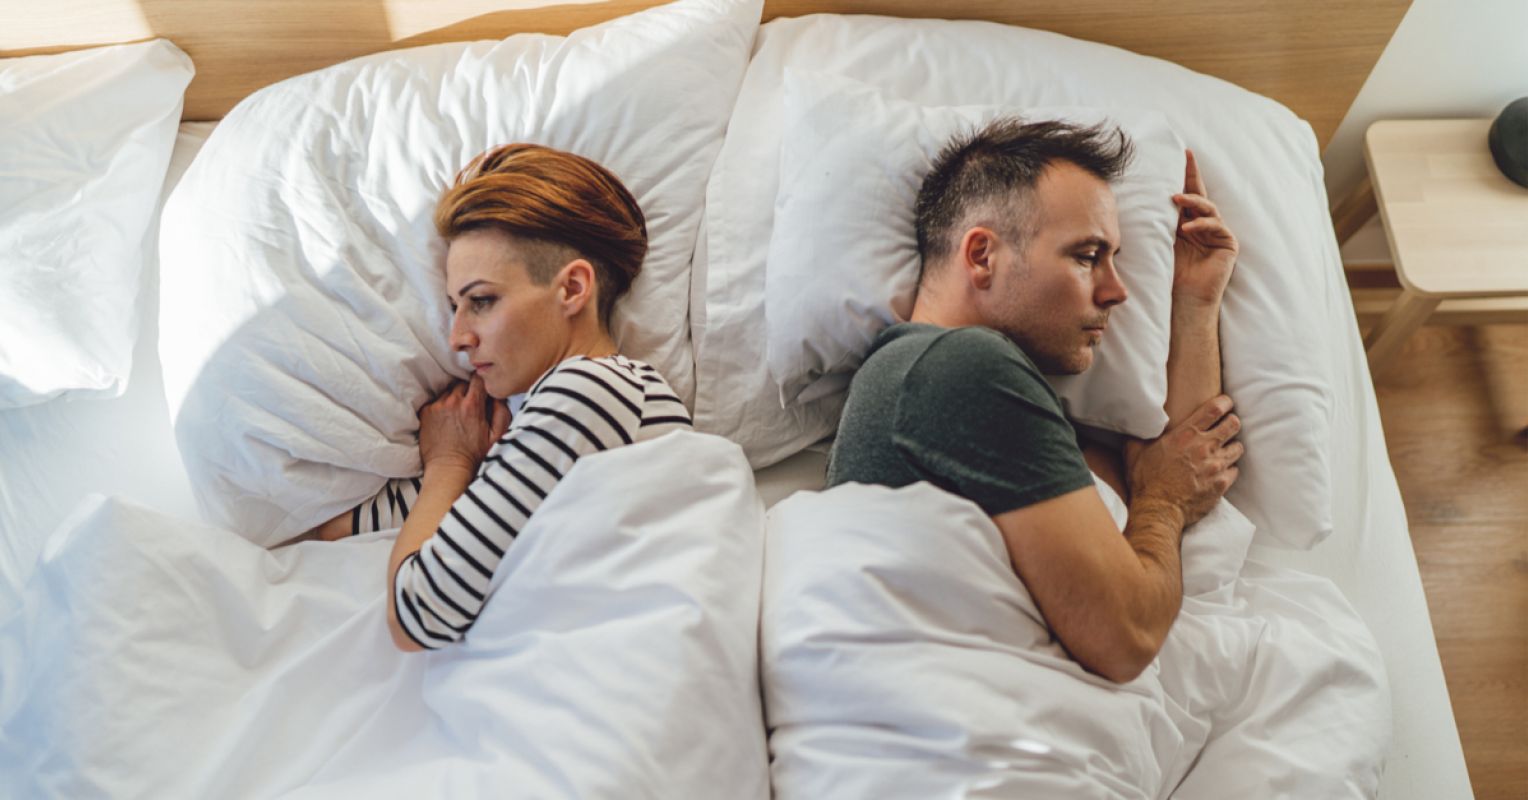 When Couples Stop Having Sex, Whose Choice Is It? Psychology Today photo